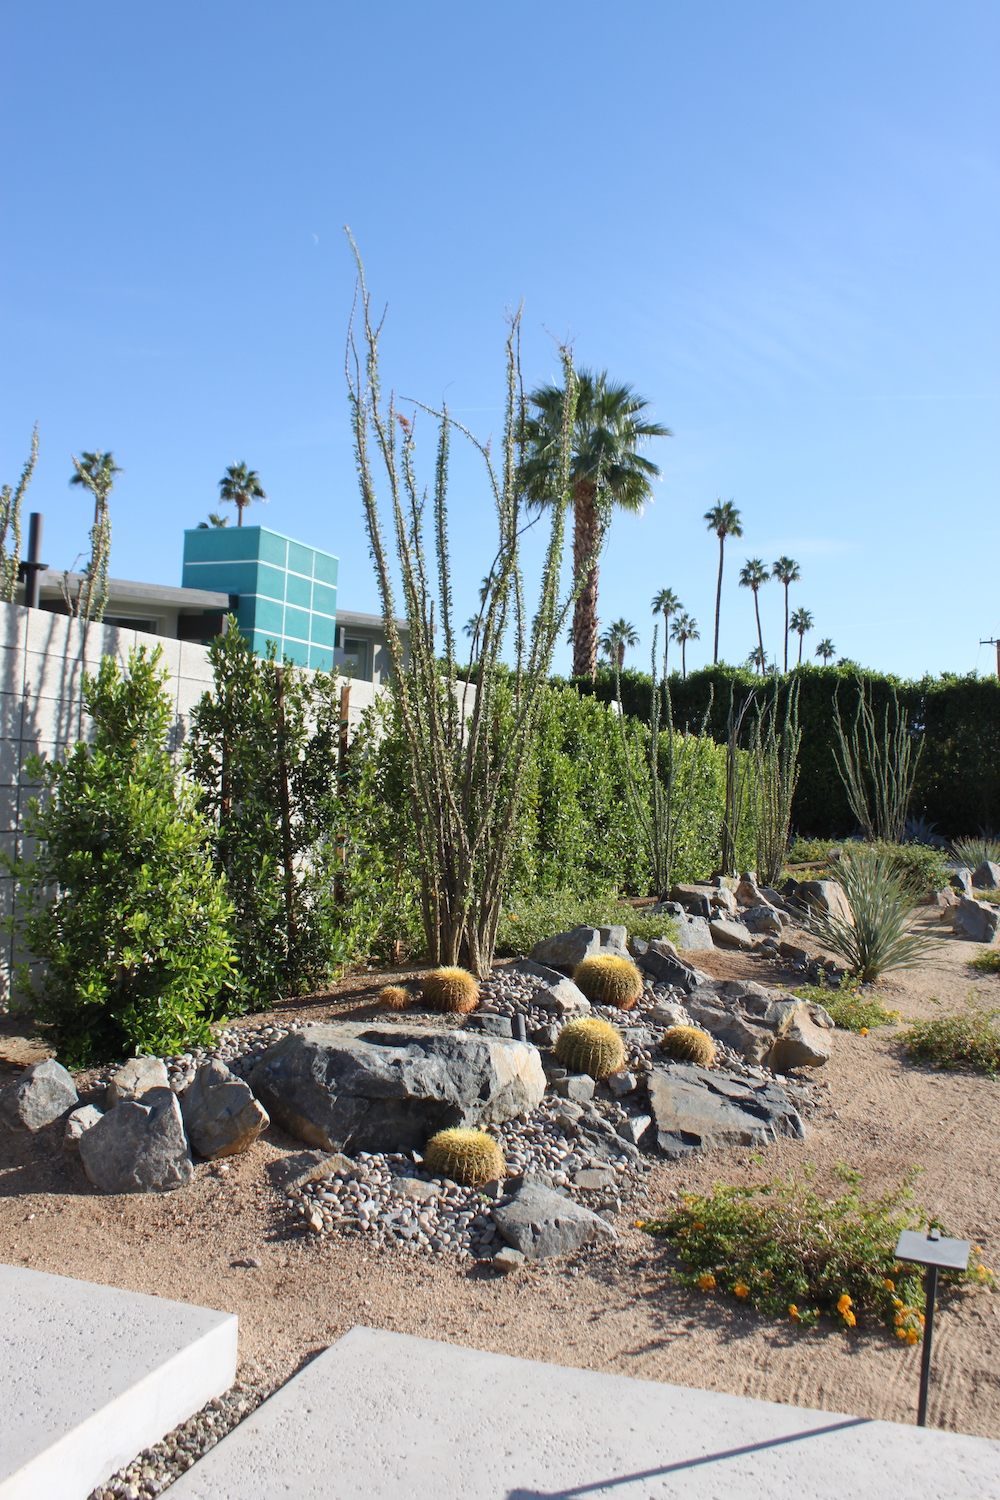 Planting on a residential street corner in Palm Springs